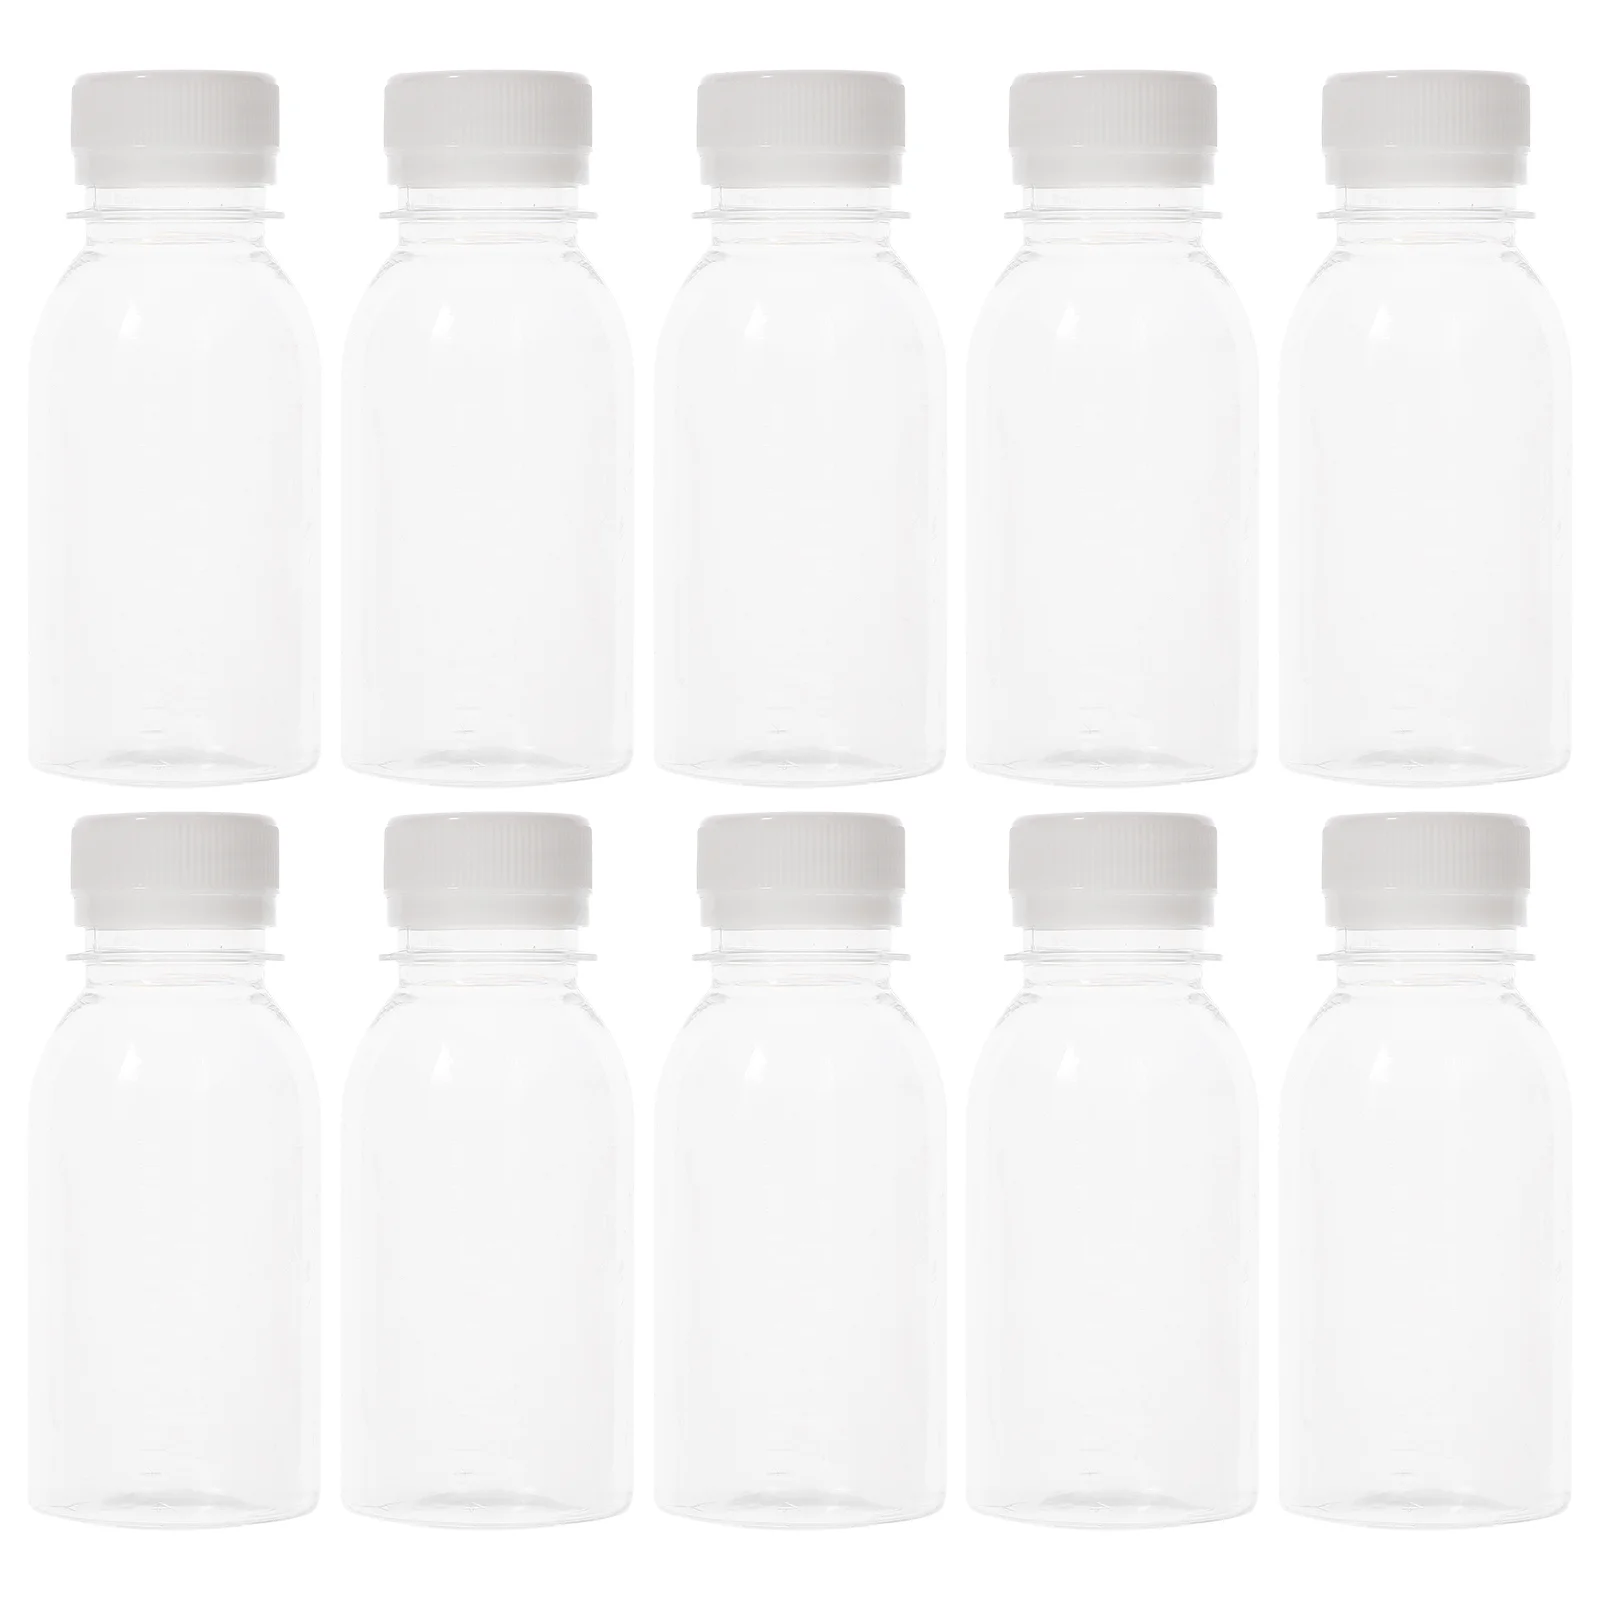 

Bottles Bottle Reusable Water Smoothie Empty Dressing Box Cup Shot Ginger Clear Salad Containers Beverage Caps Drink Sample